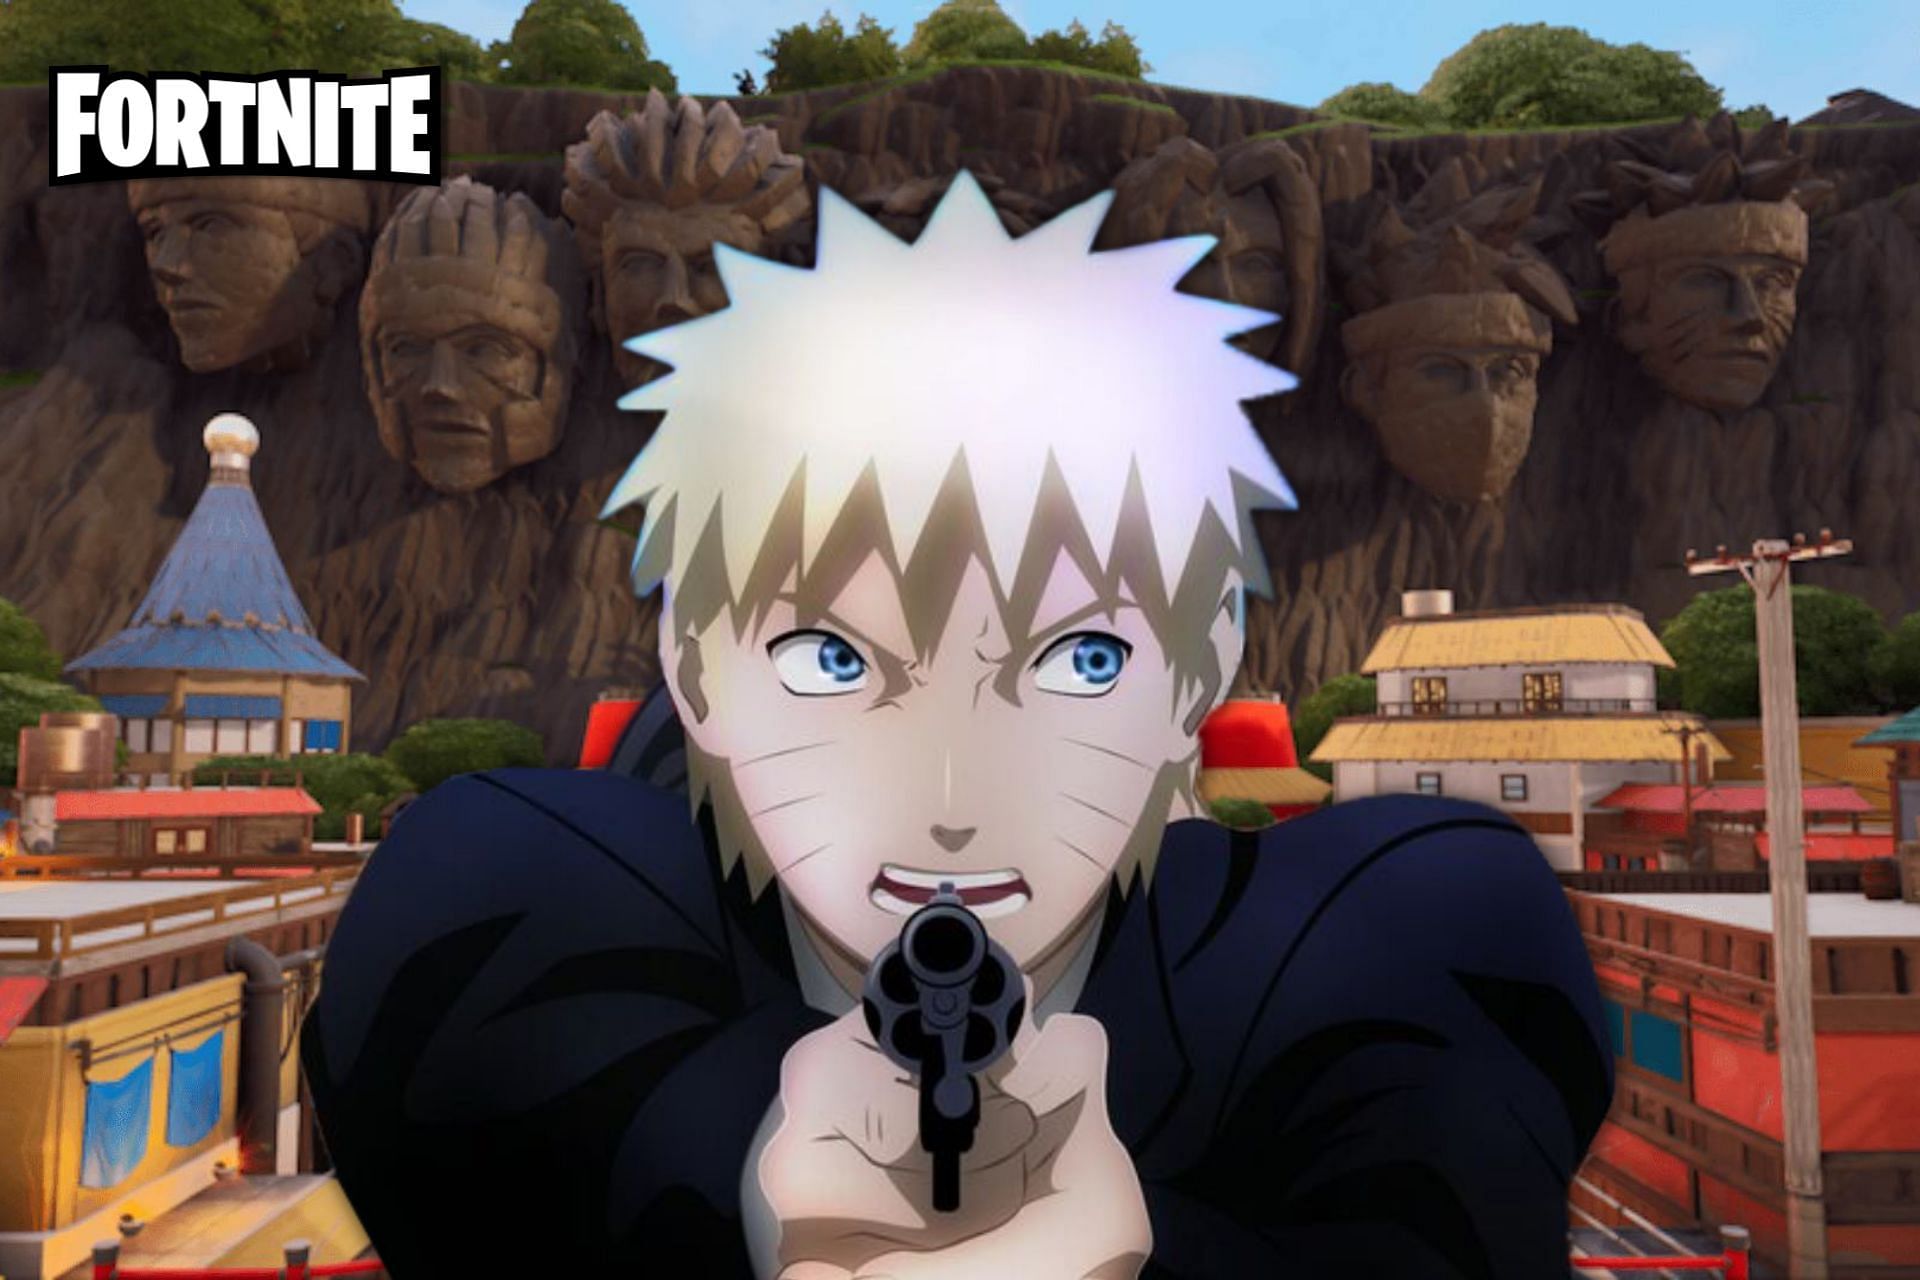 Naruto Fortnite Memes Show What Ninjas Can Do With A Gun